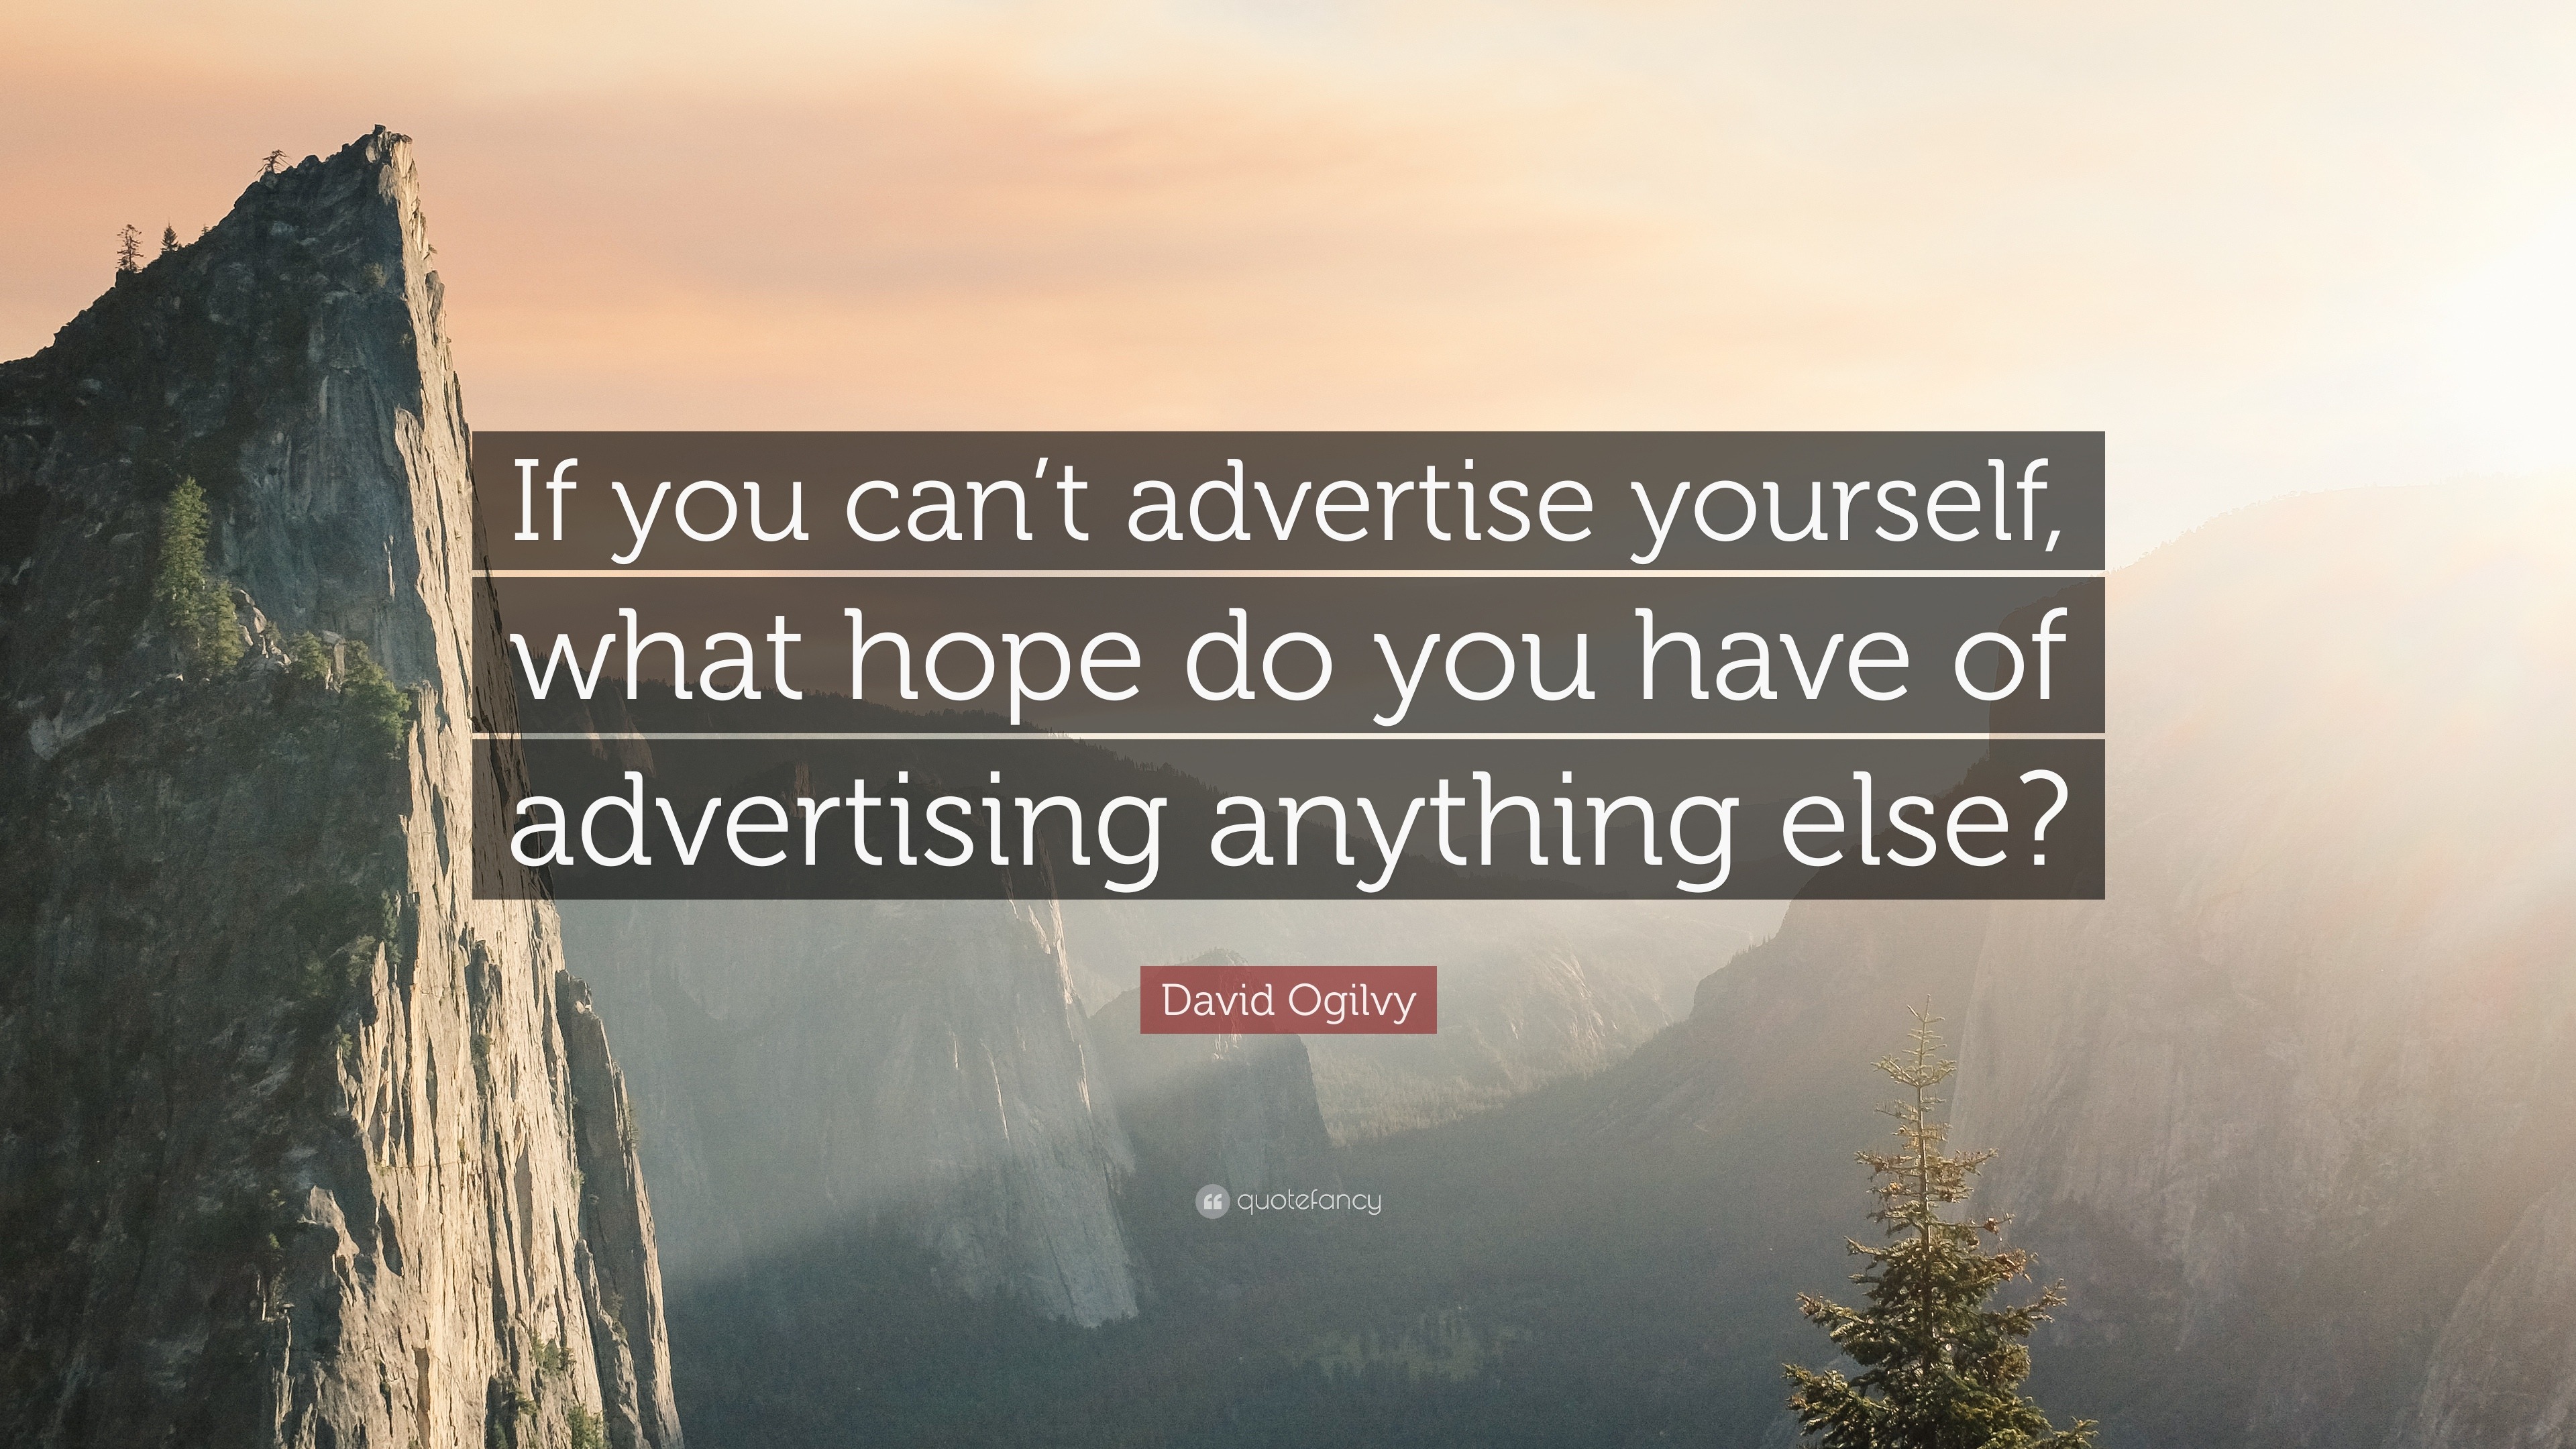 David Ogilvy Quote: "If you can't advertise yourself, what ...